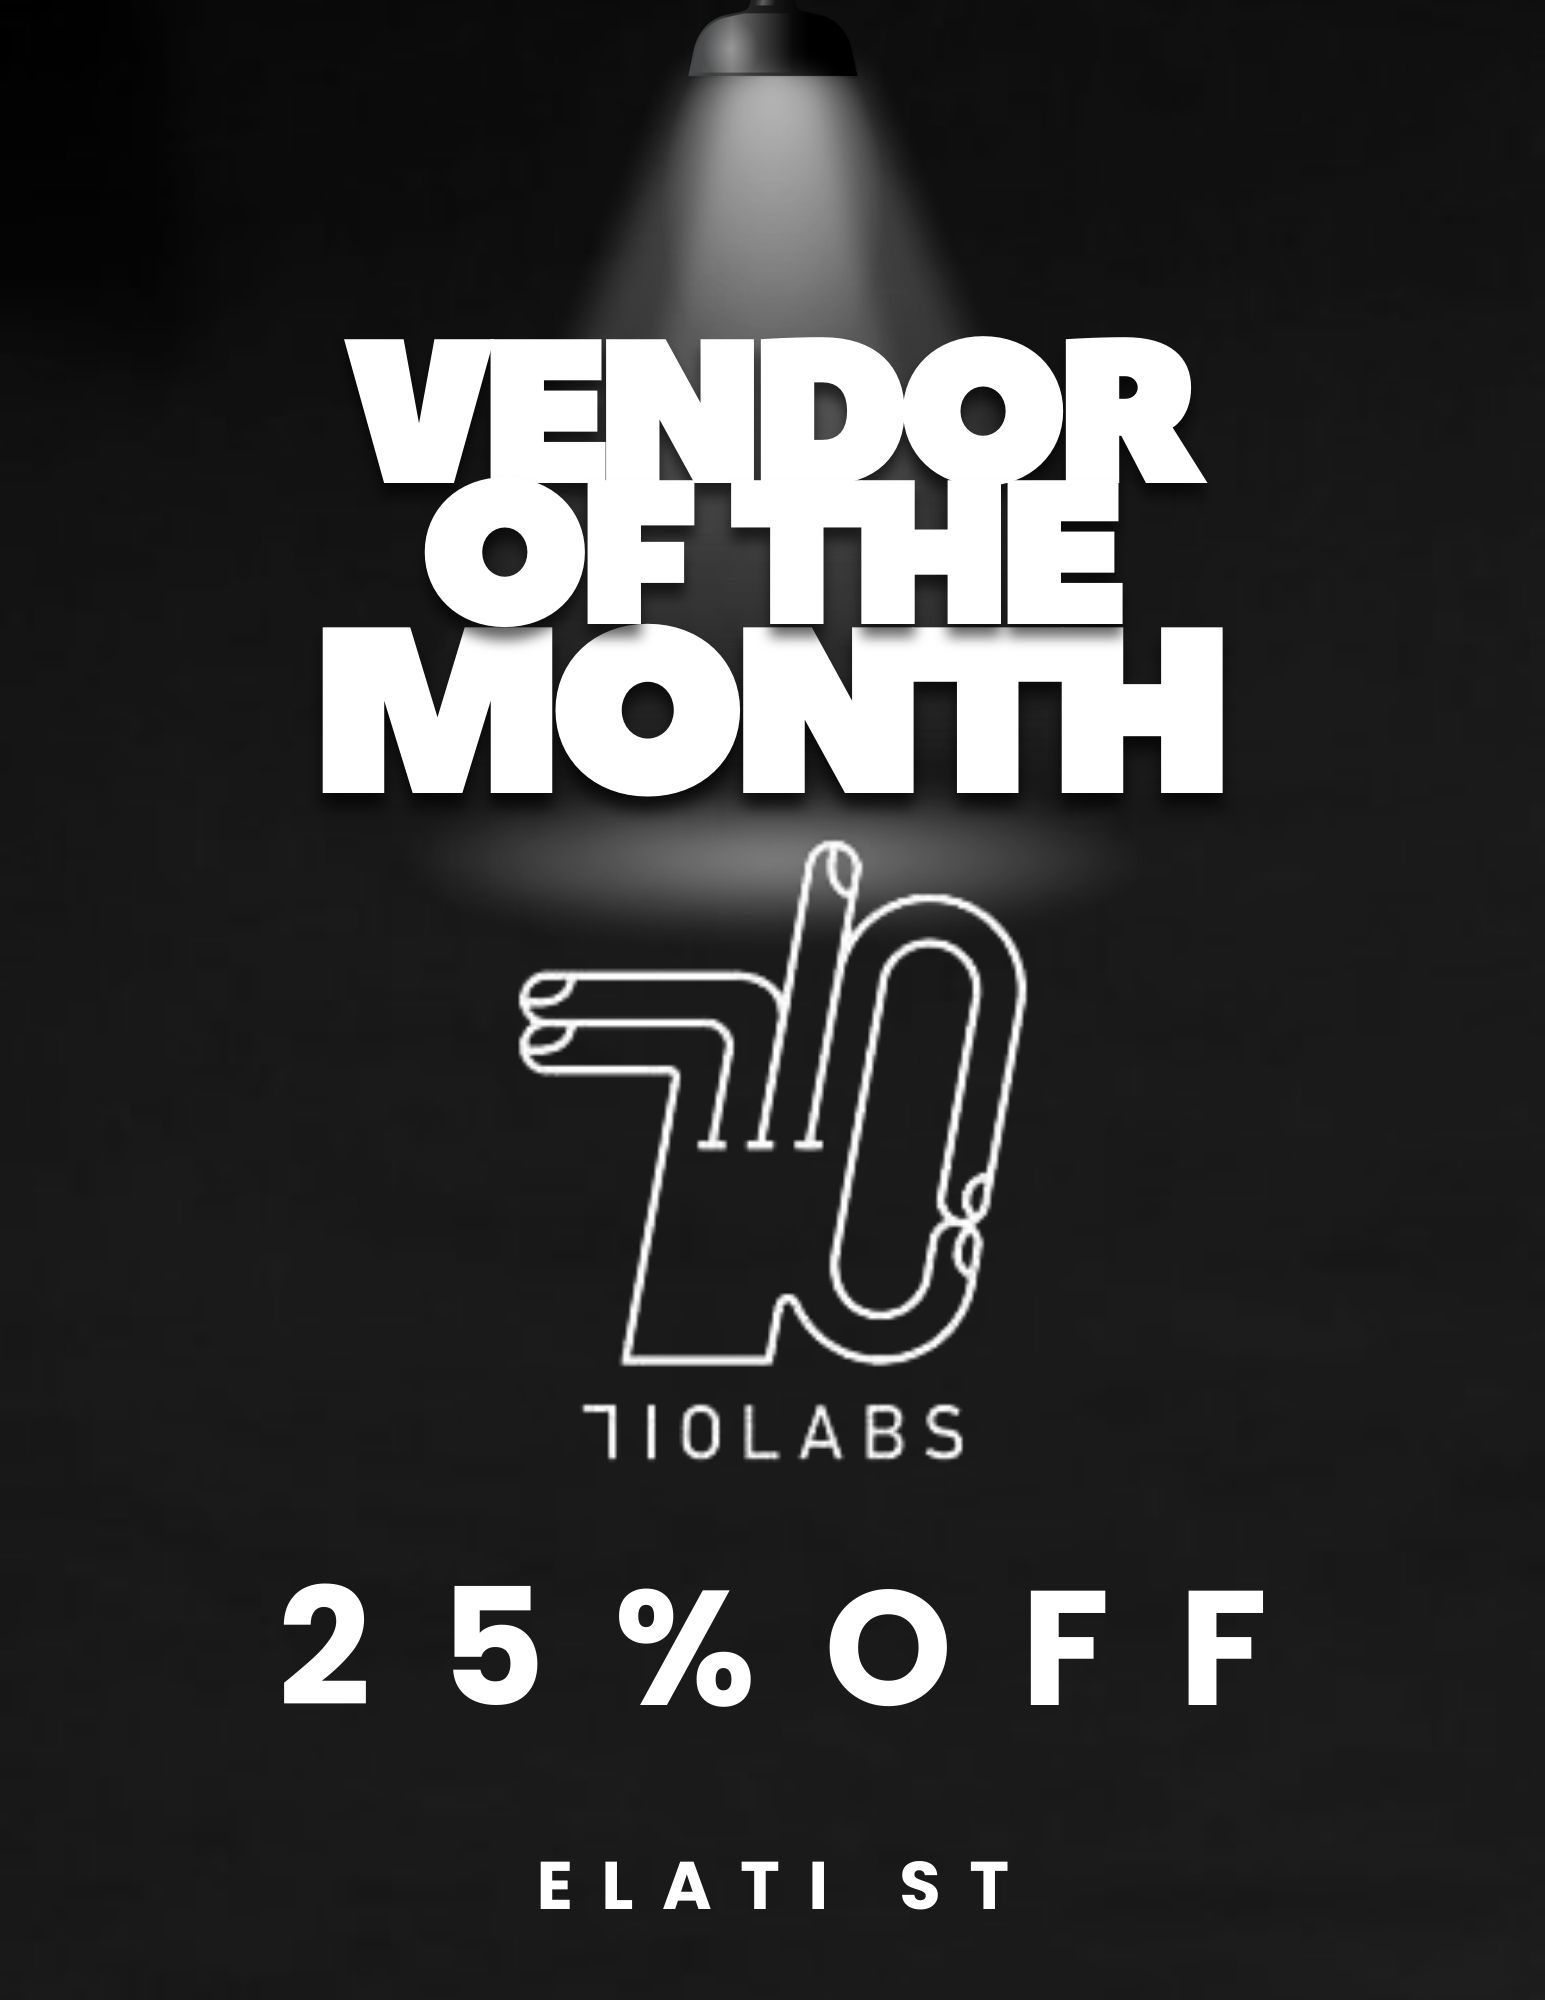 vendor of the month 710 labs